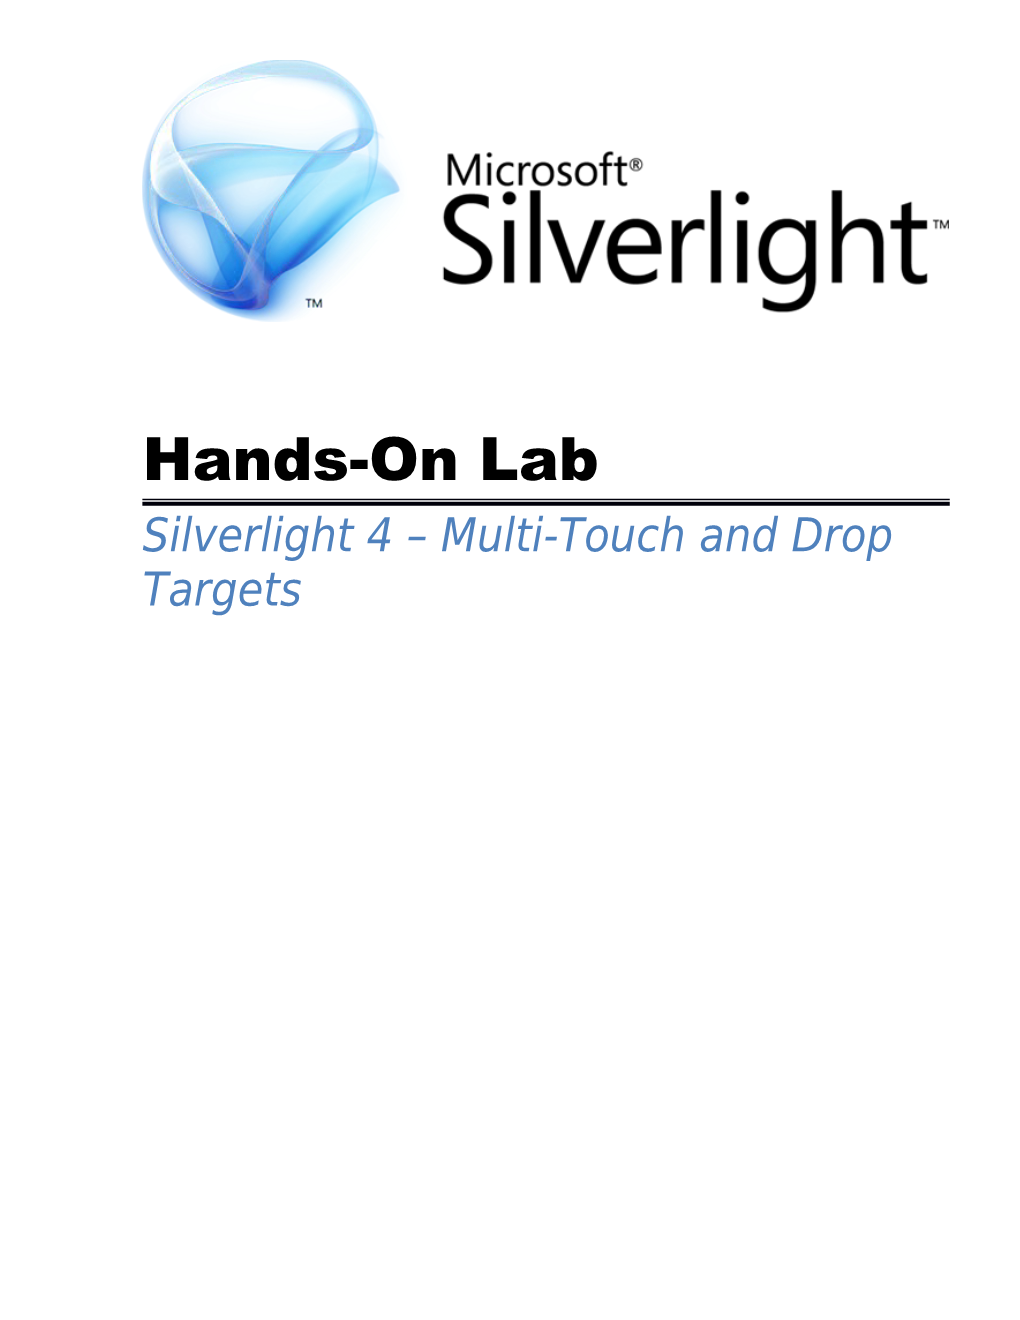 Multi Touch in Silverlight Lab